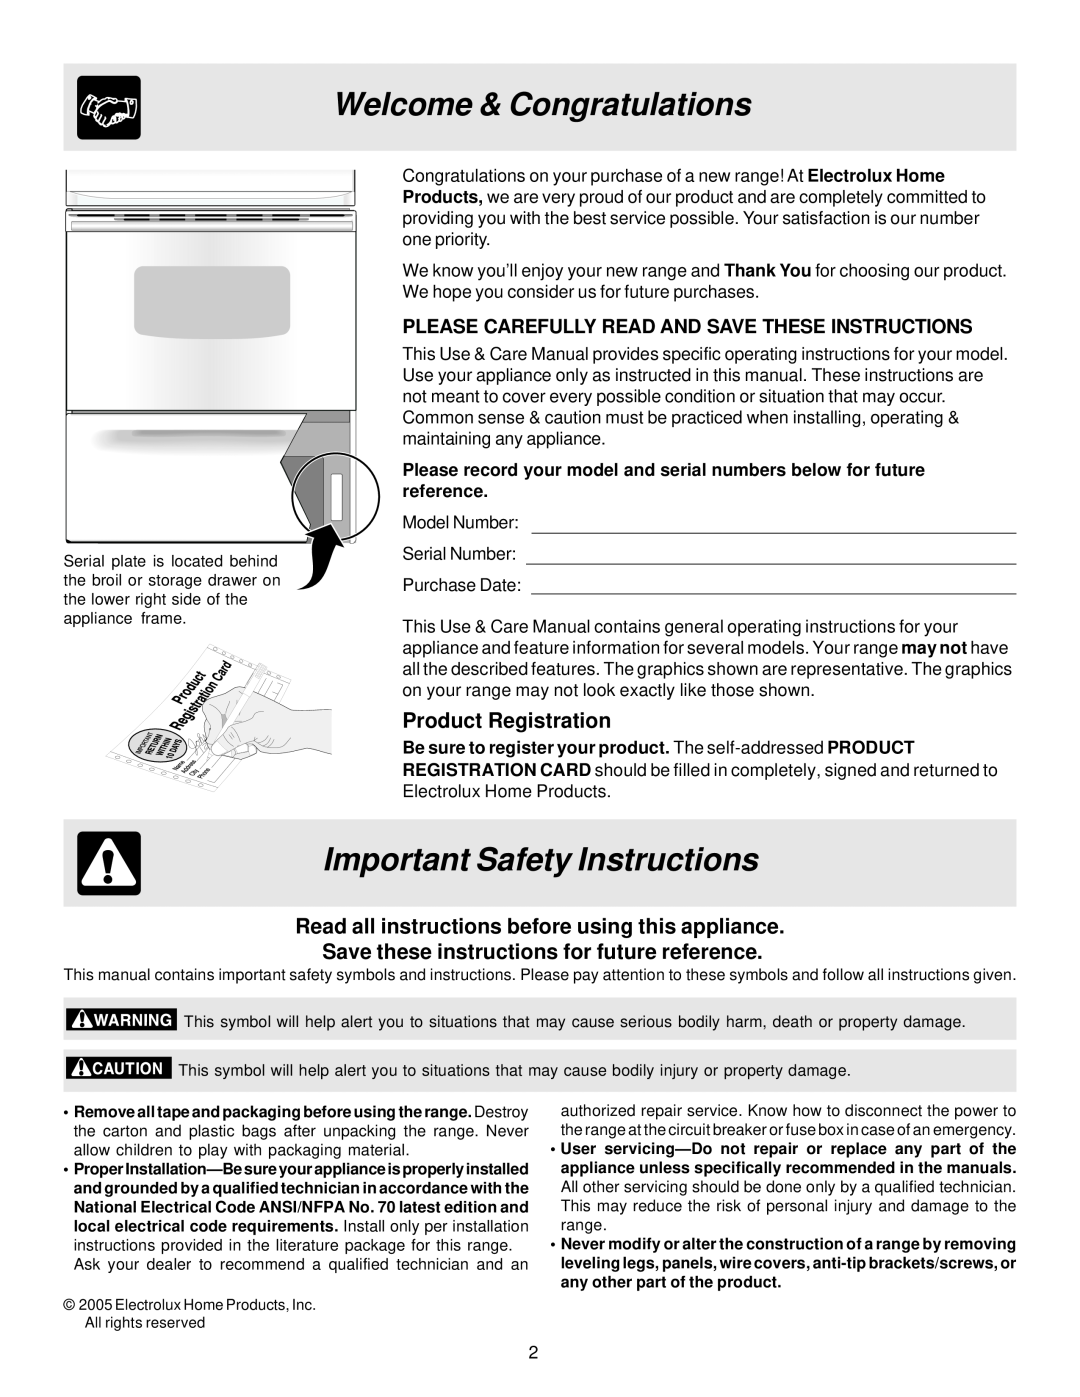 Frigidaire ES100 Welcome & Congratulations, Important Safety Instructions, Product Registration 